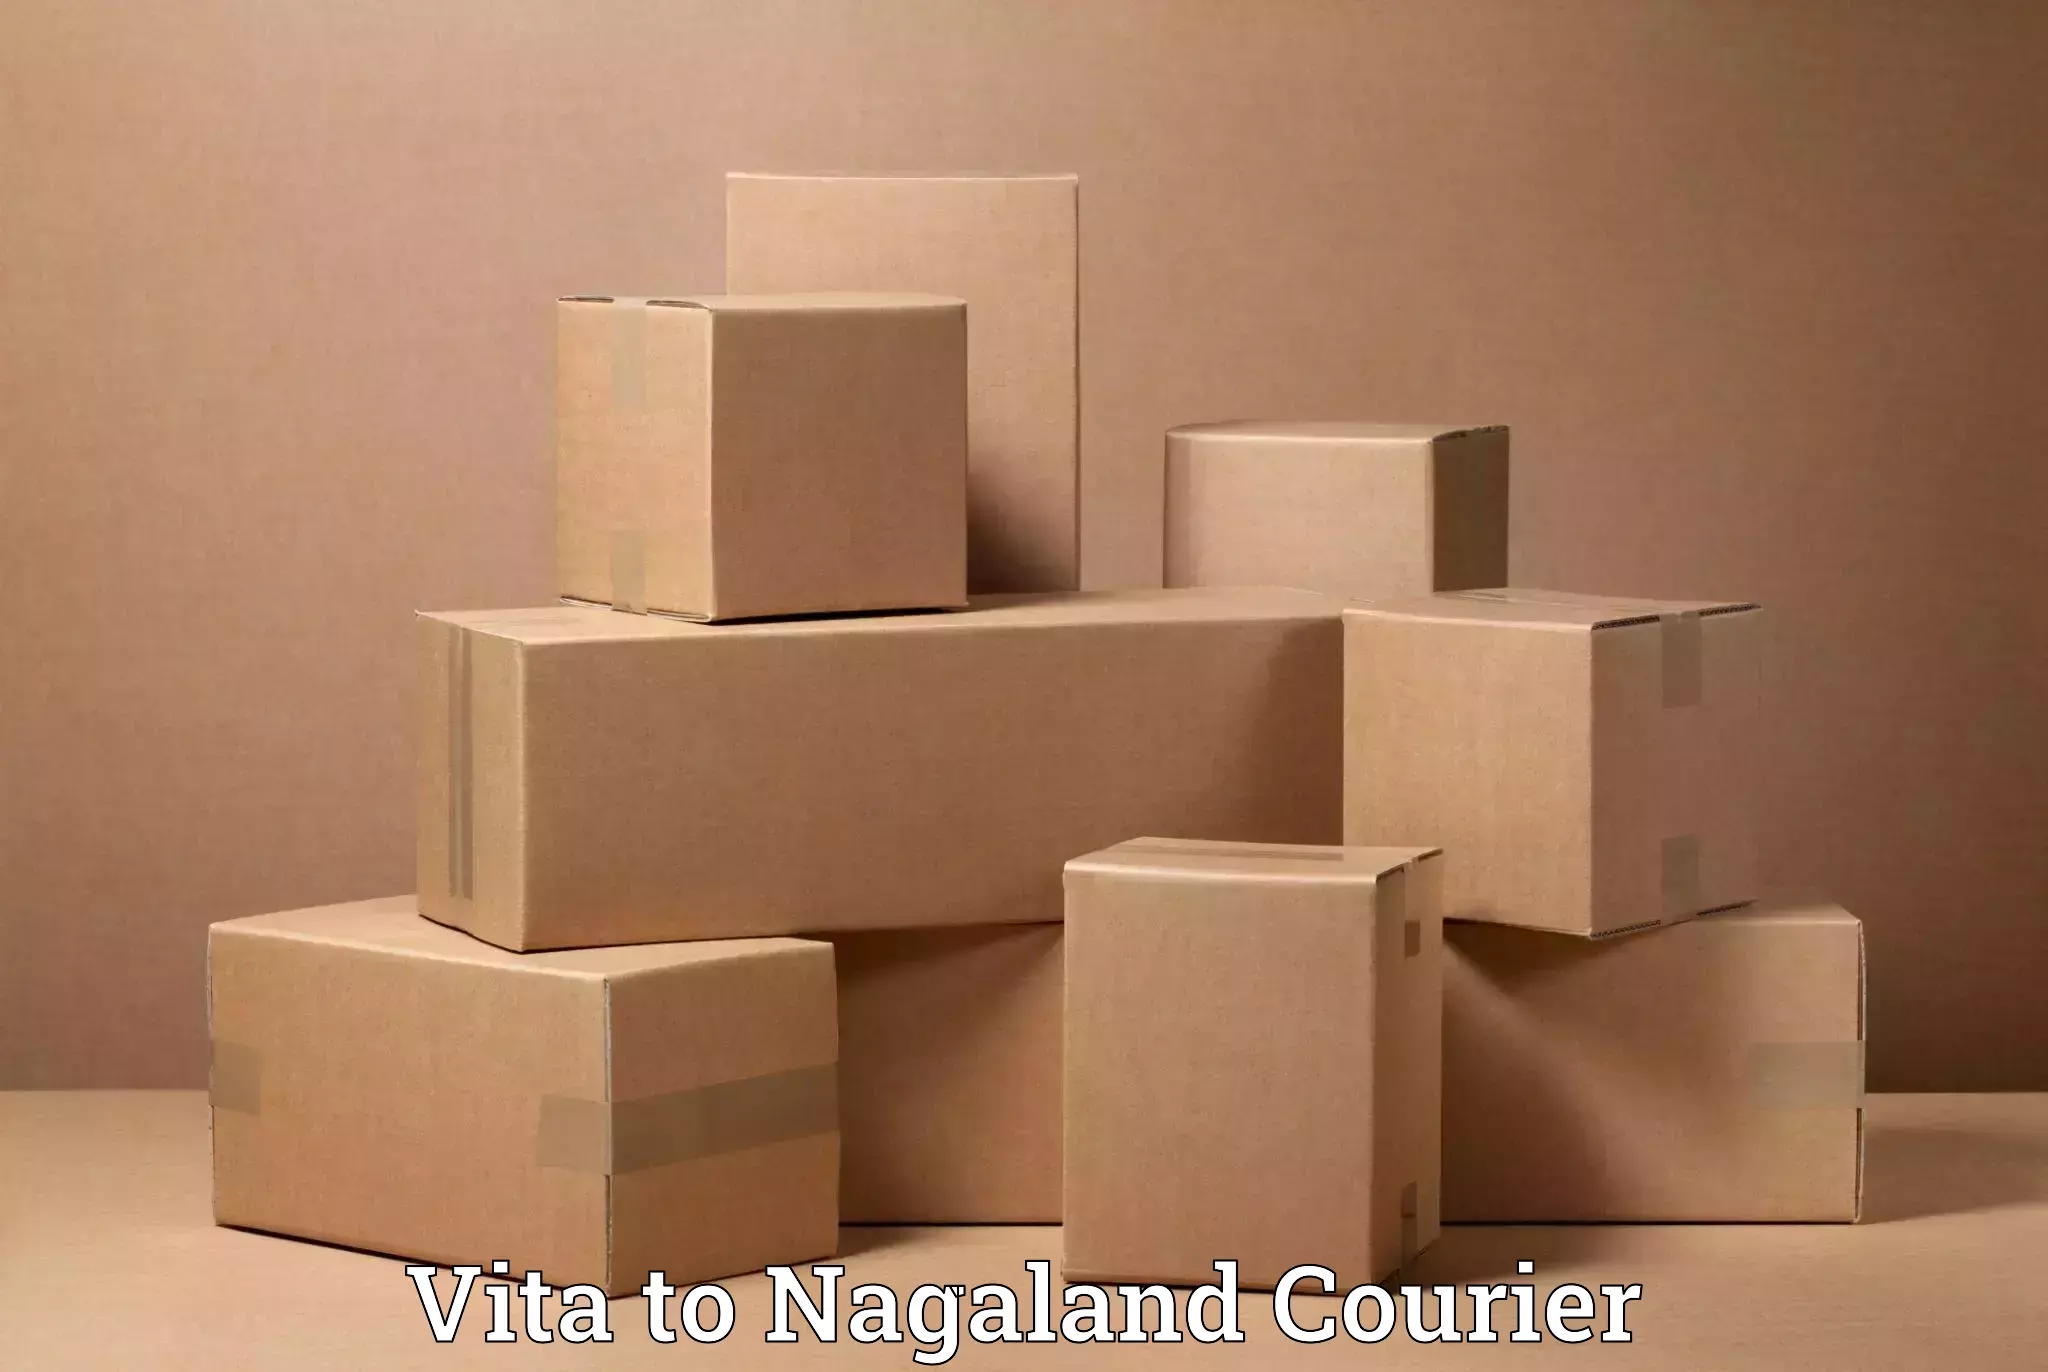 Expert relocation solutions Vita to Nagaland